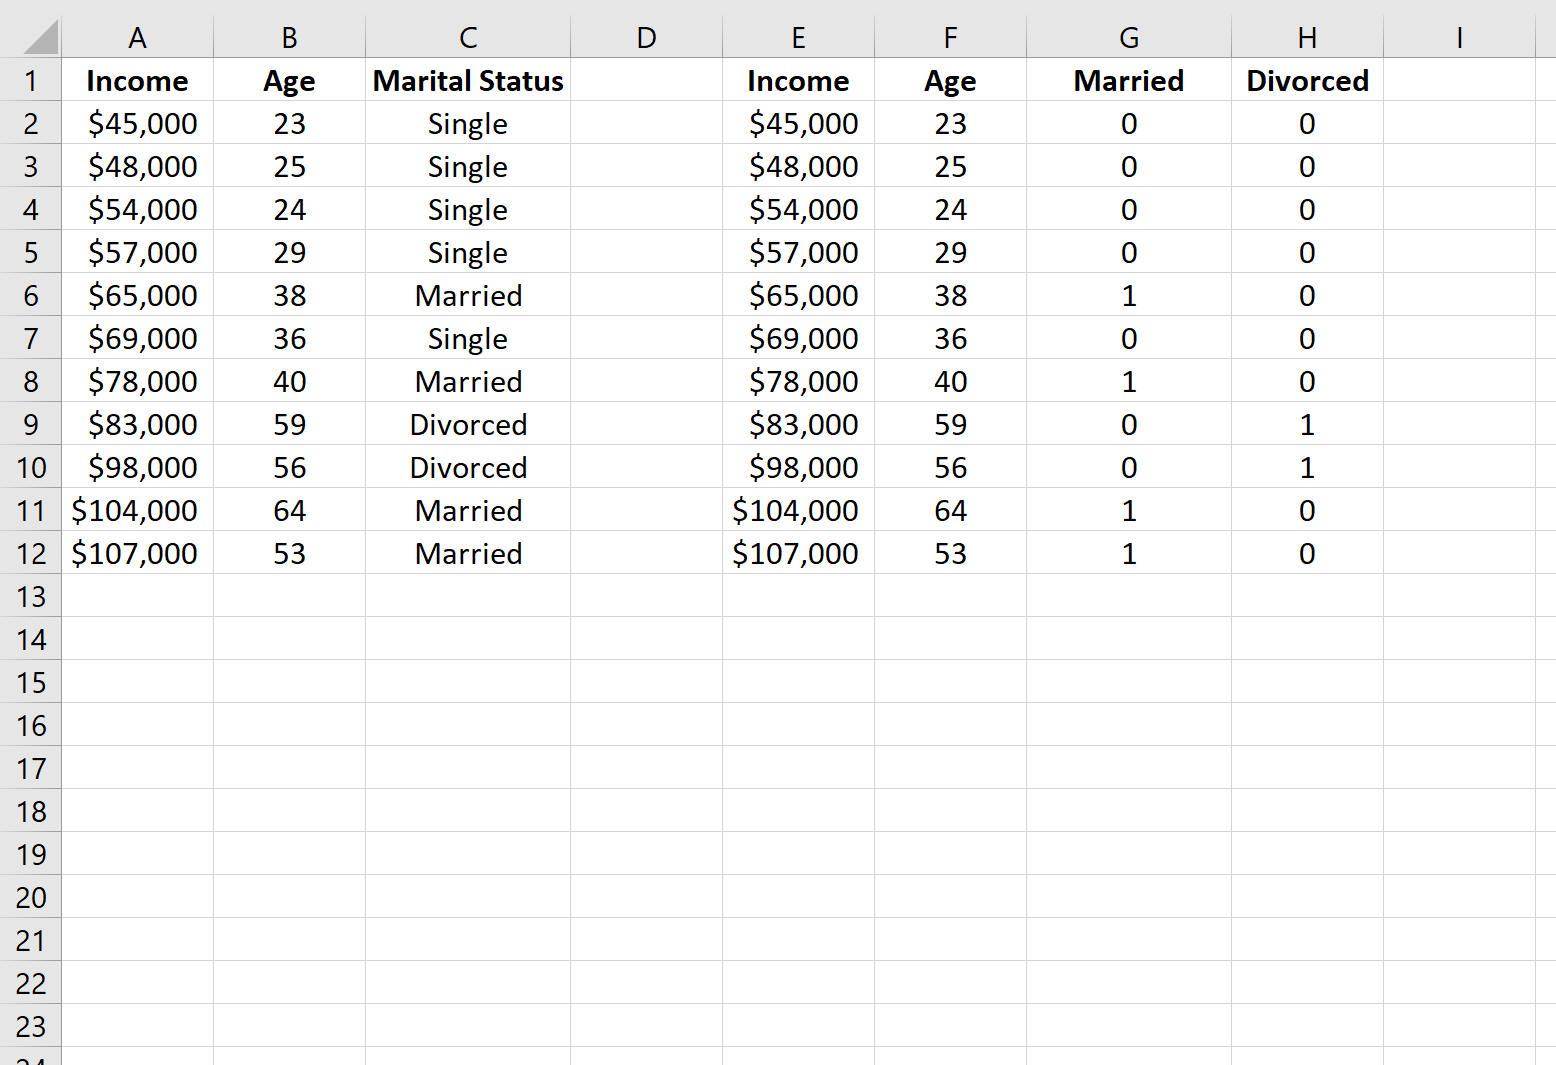 Dummy variables in Excel